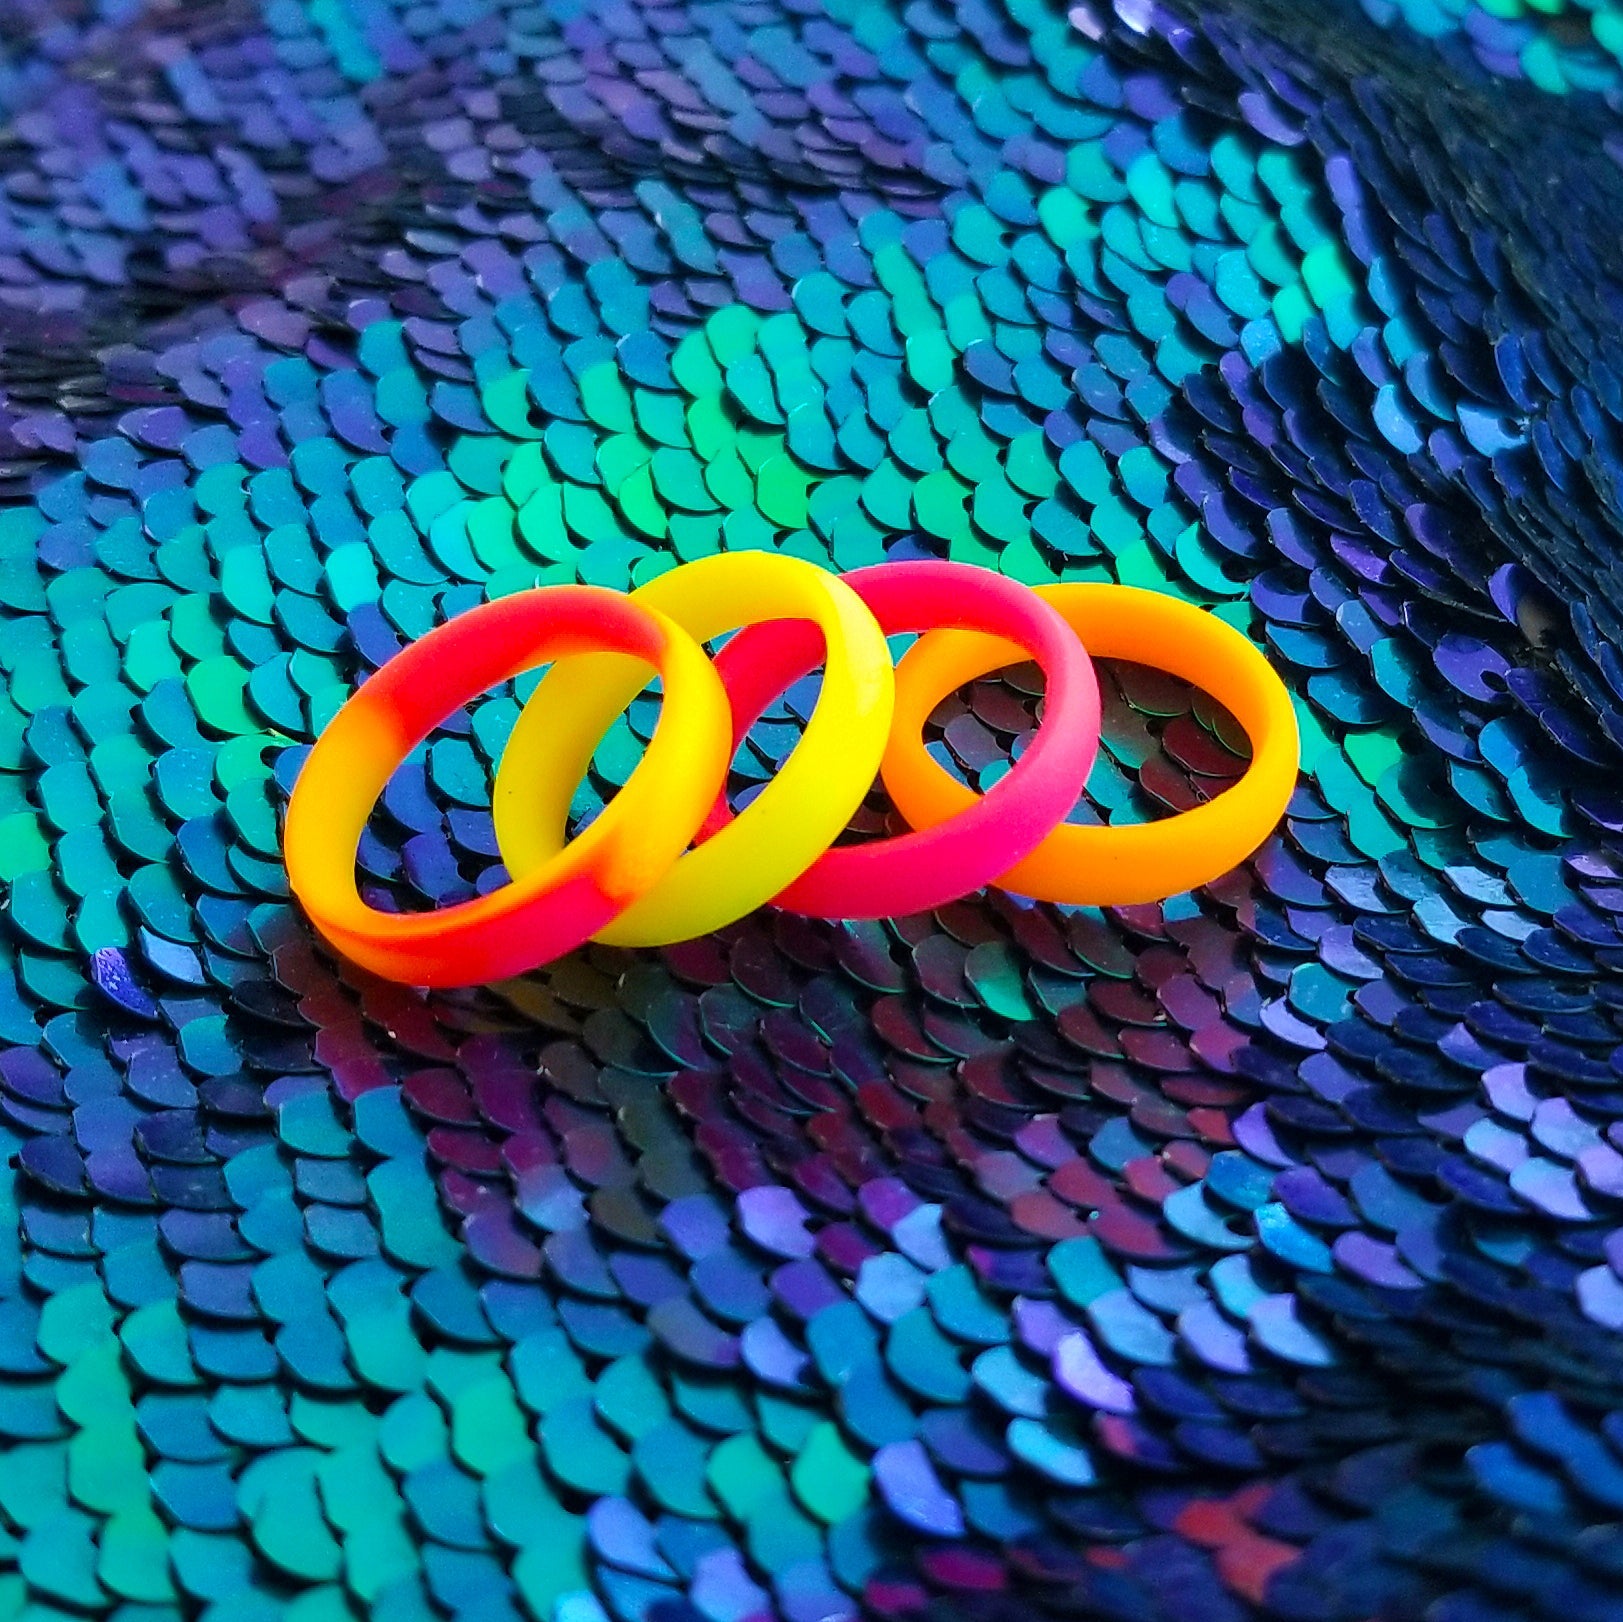 Neon Hot Pink Breathable Silicone Ring - Knot Theory